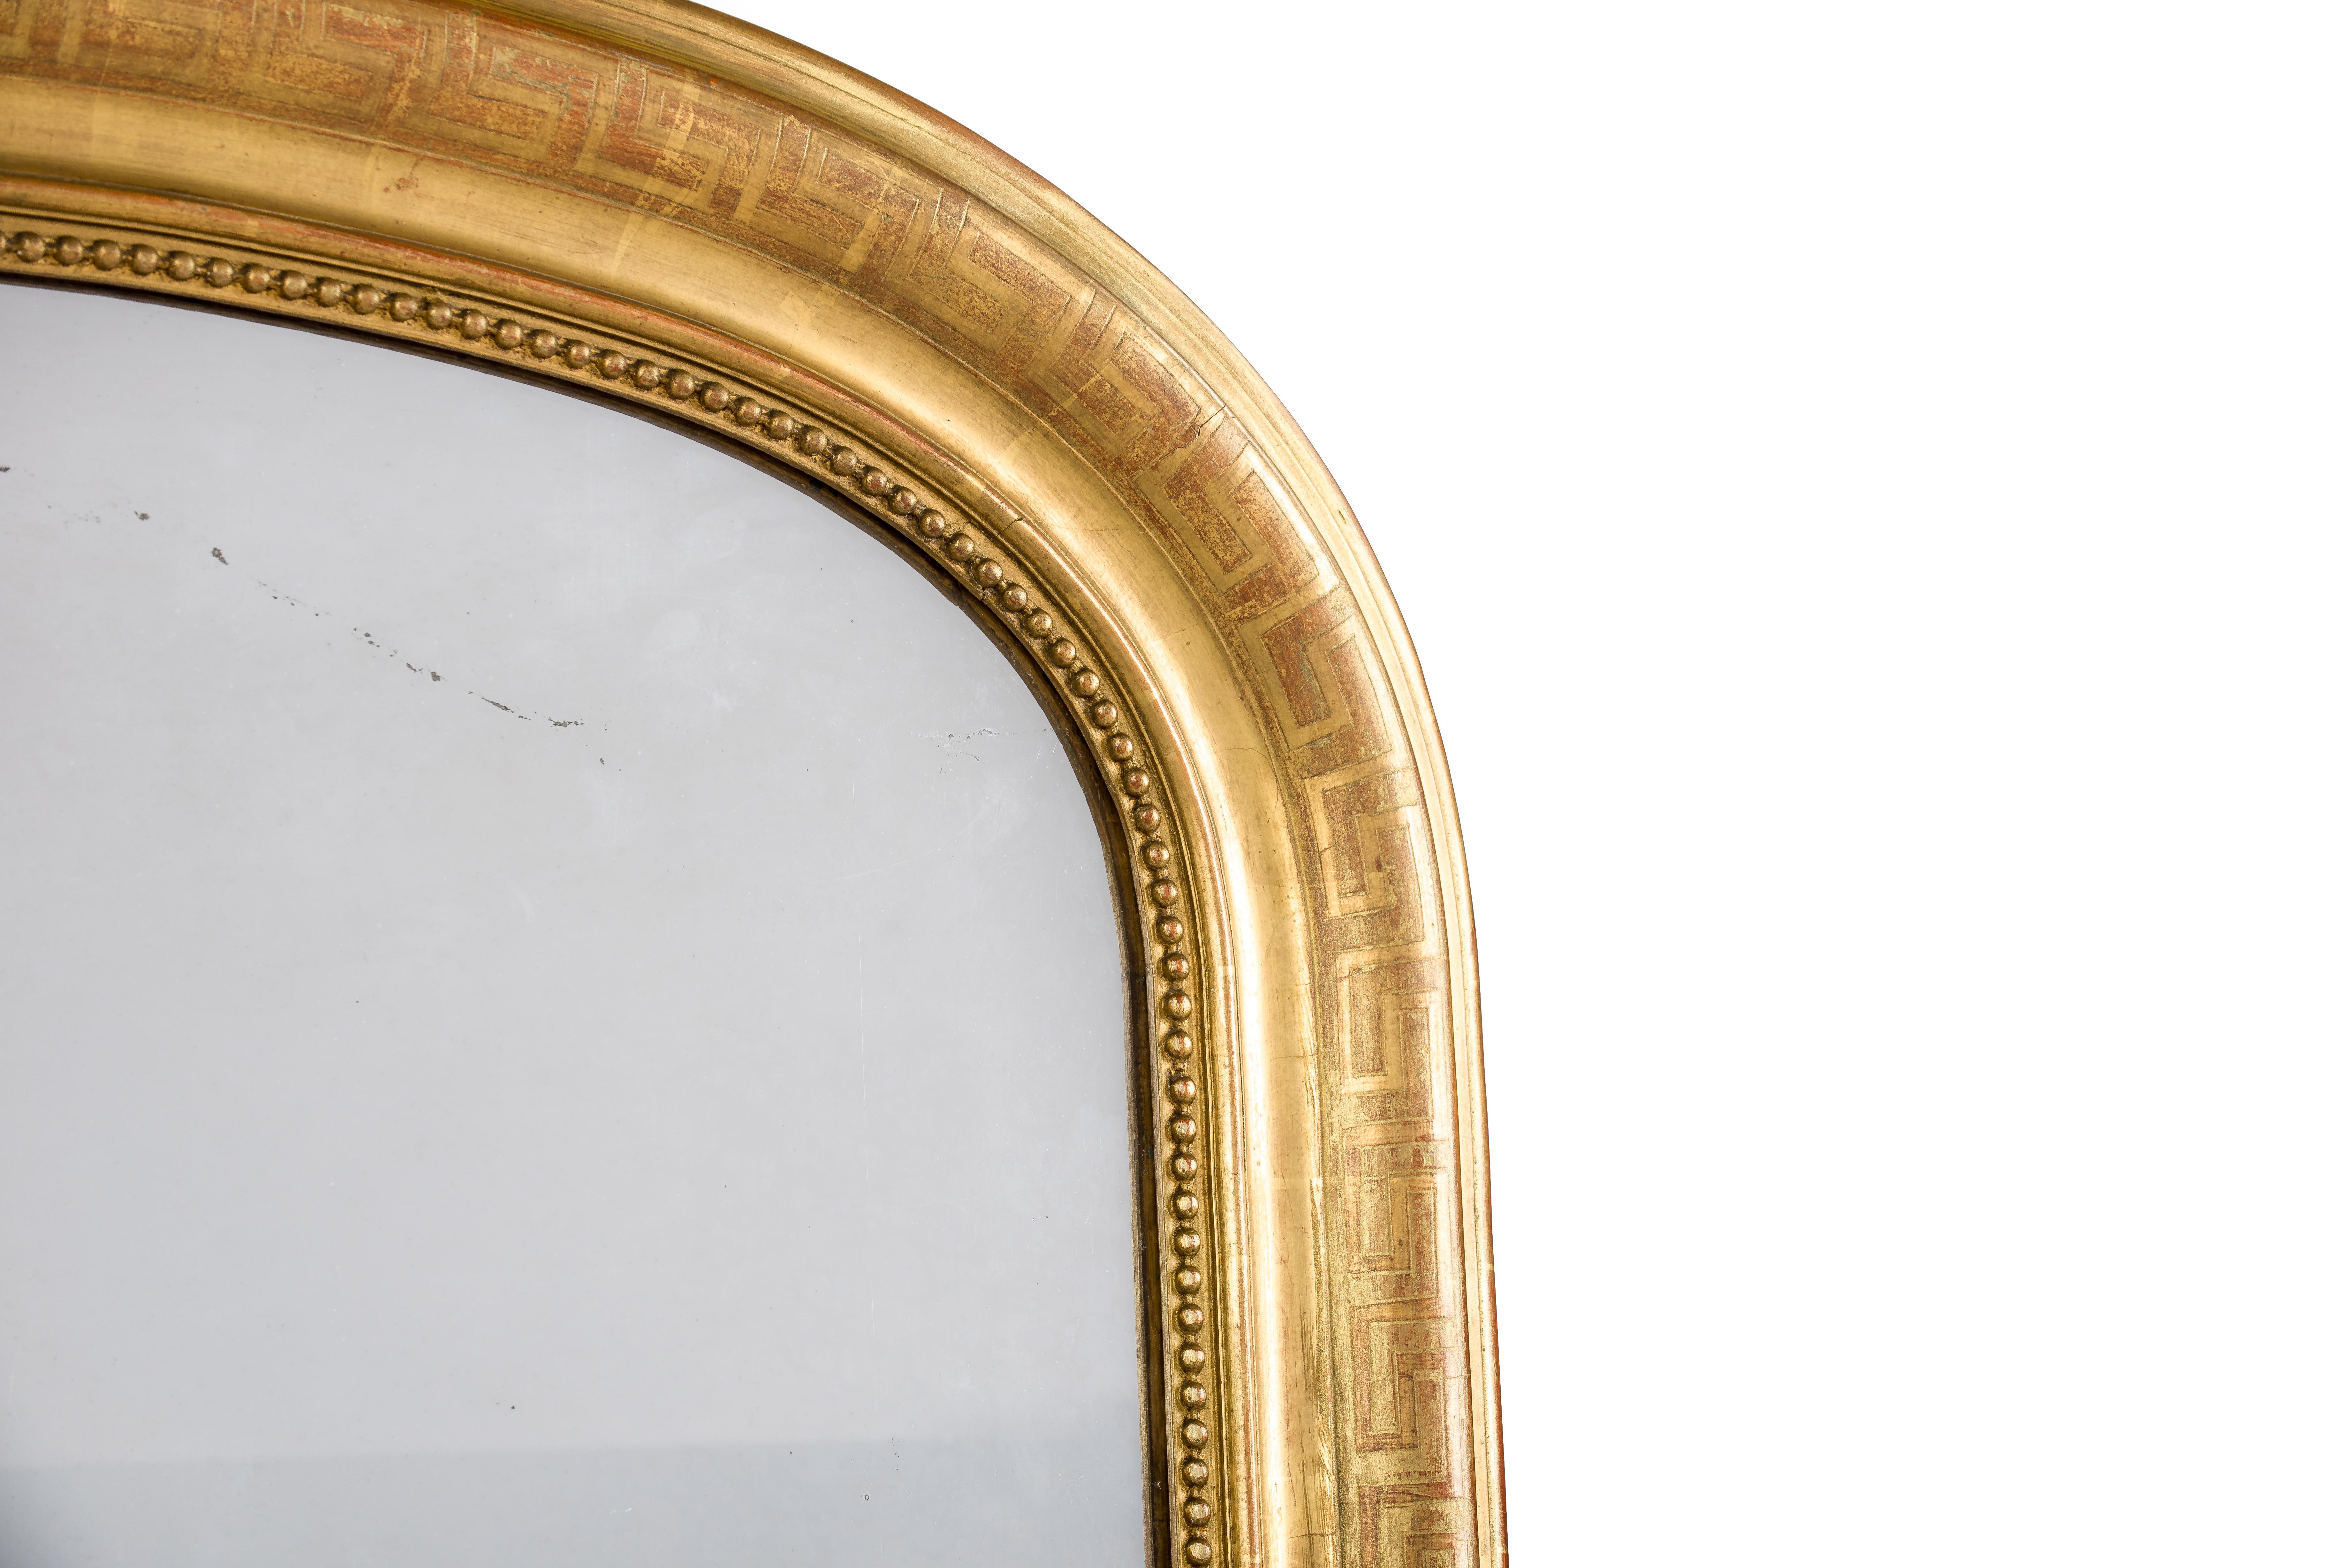 This beautiful antique mirror with an arched top was made in France circa 1850. It has upper rounded corners typical for the Louis Philippe style. The mirror has a solid pine base smoothened with gesso. An engraved Greek key pattern enriches the